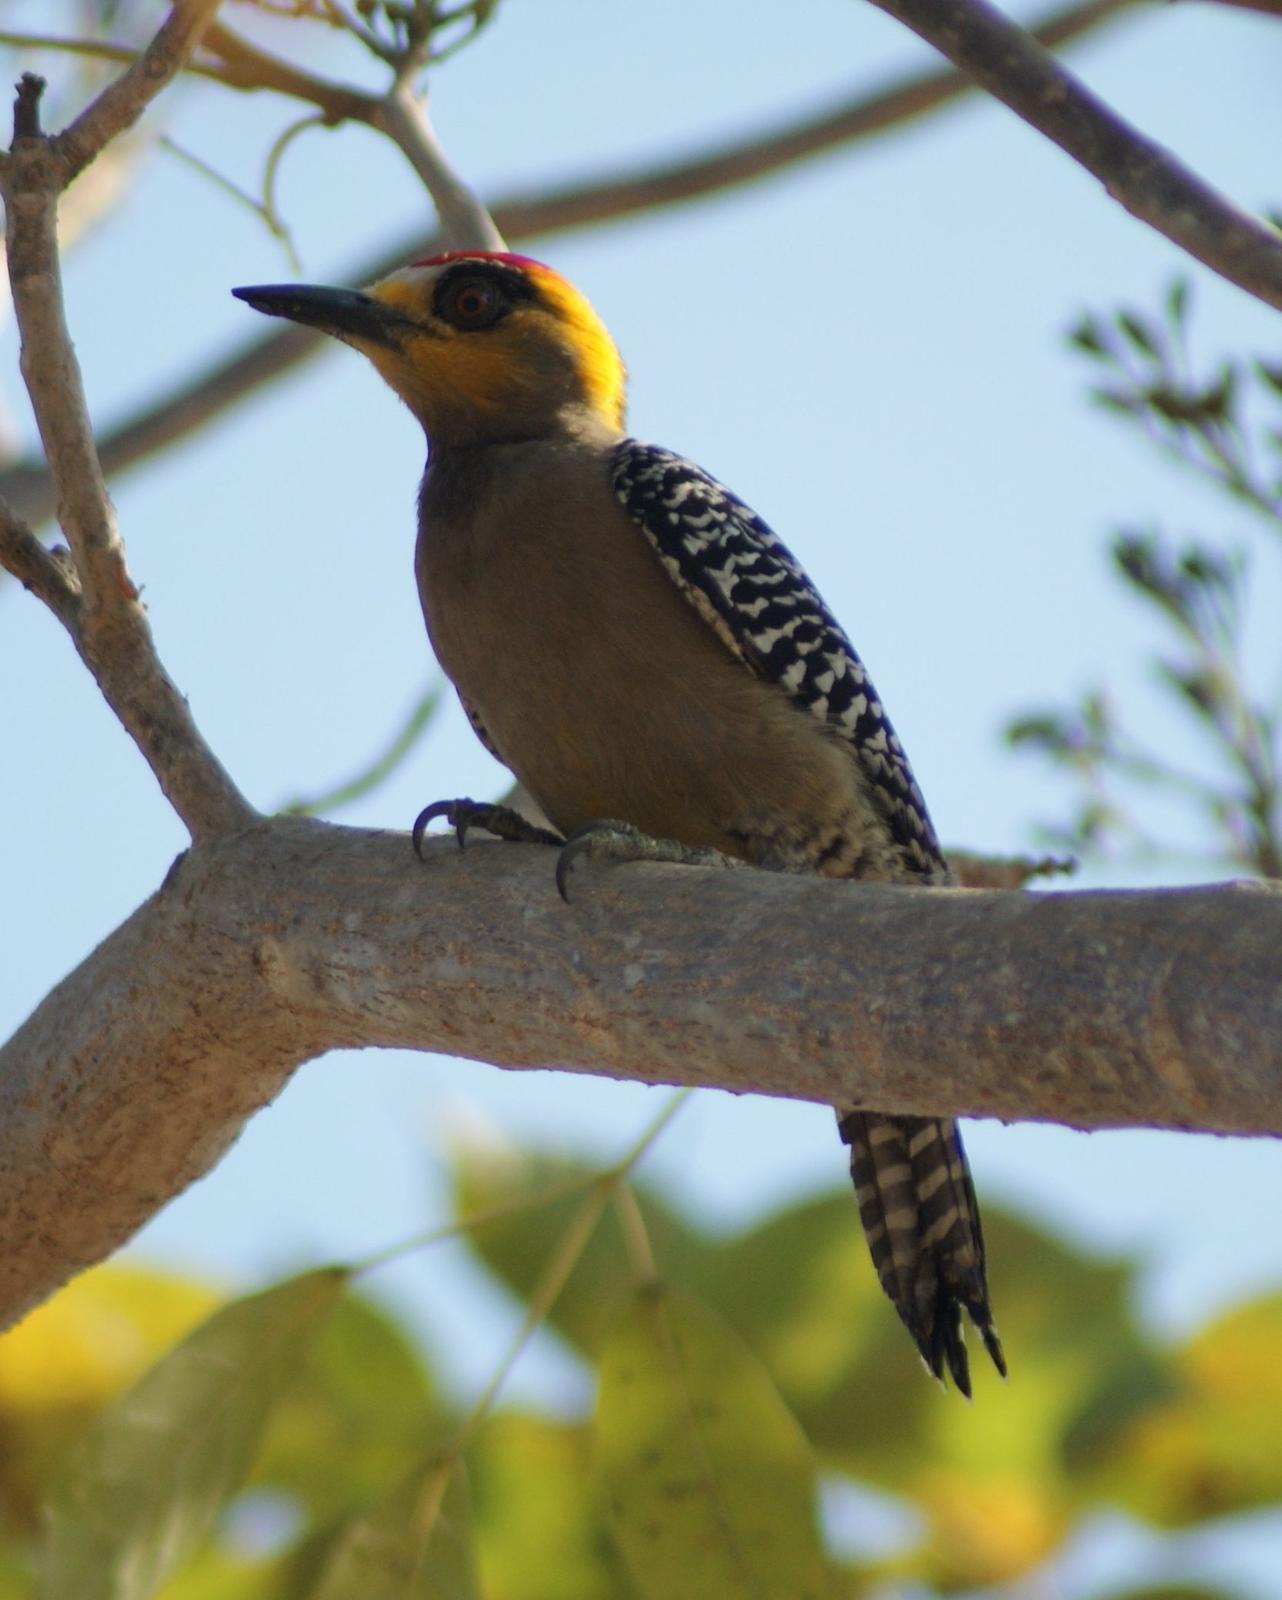 Golden-cheeked Woodpecker Photo by Robin Oxley